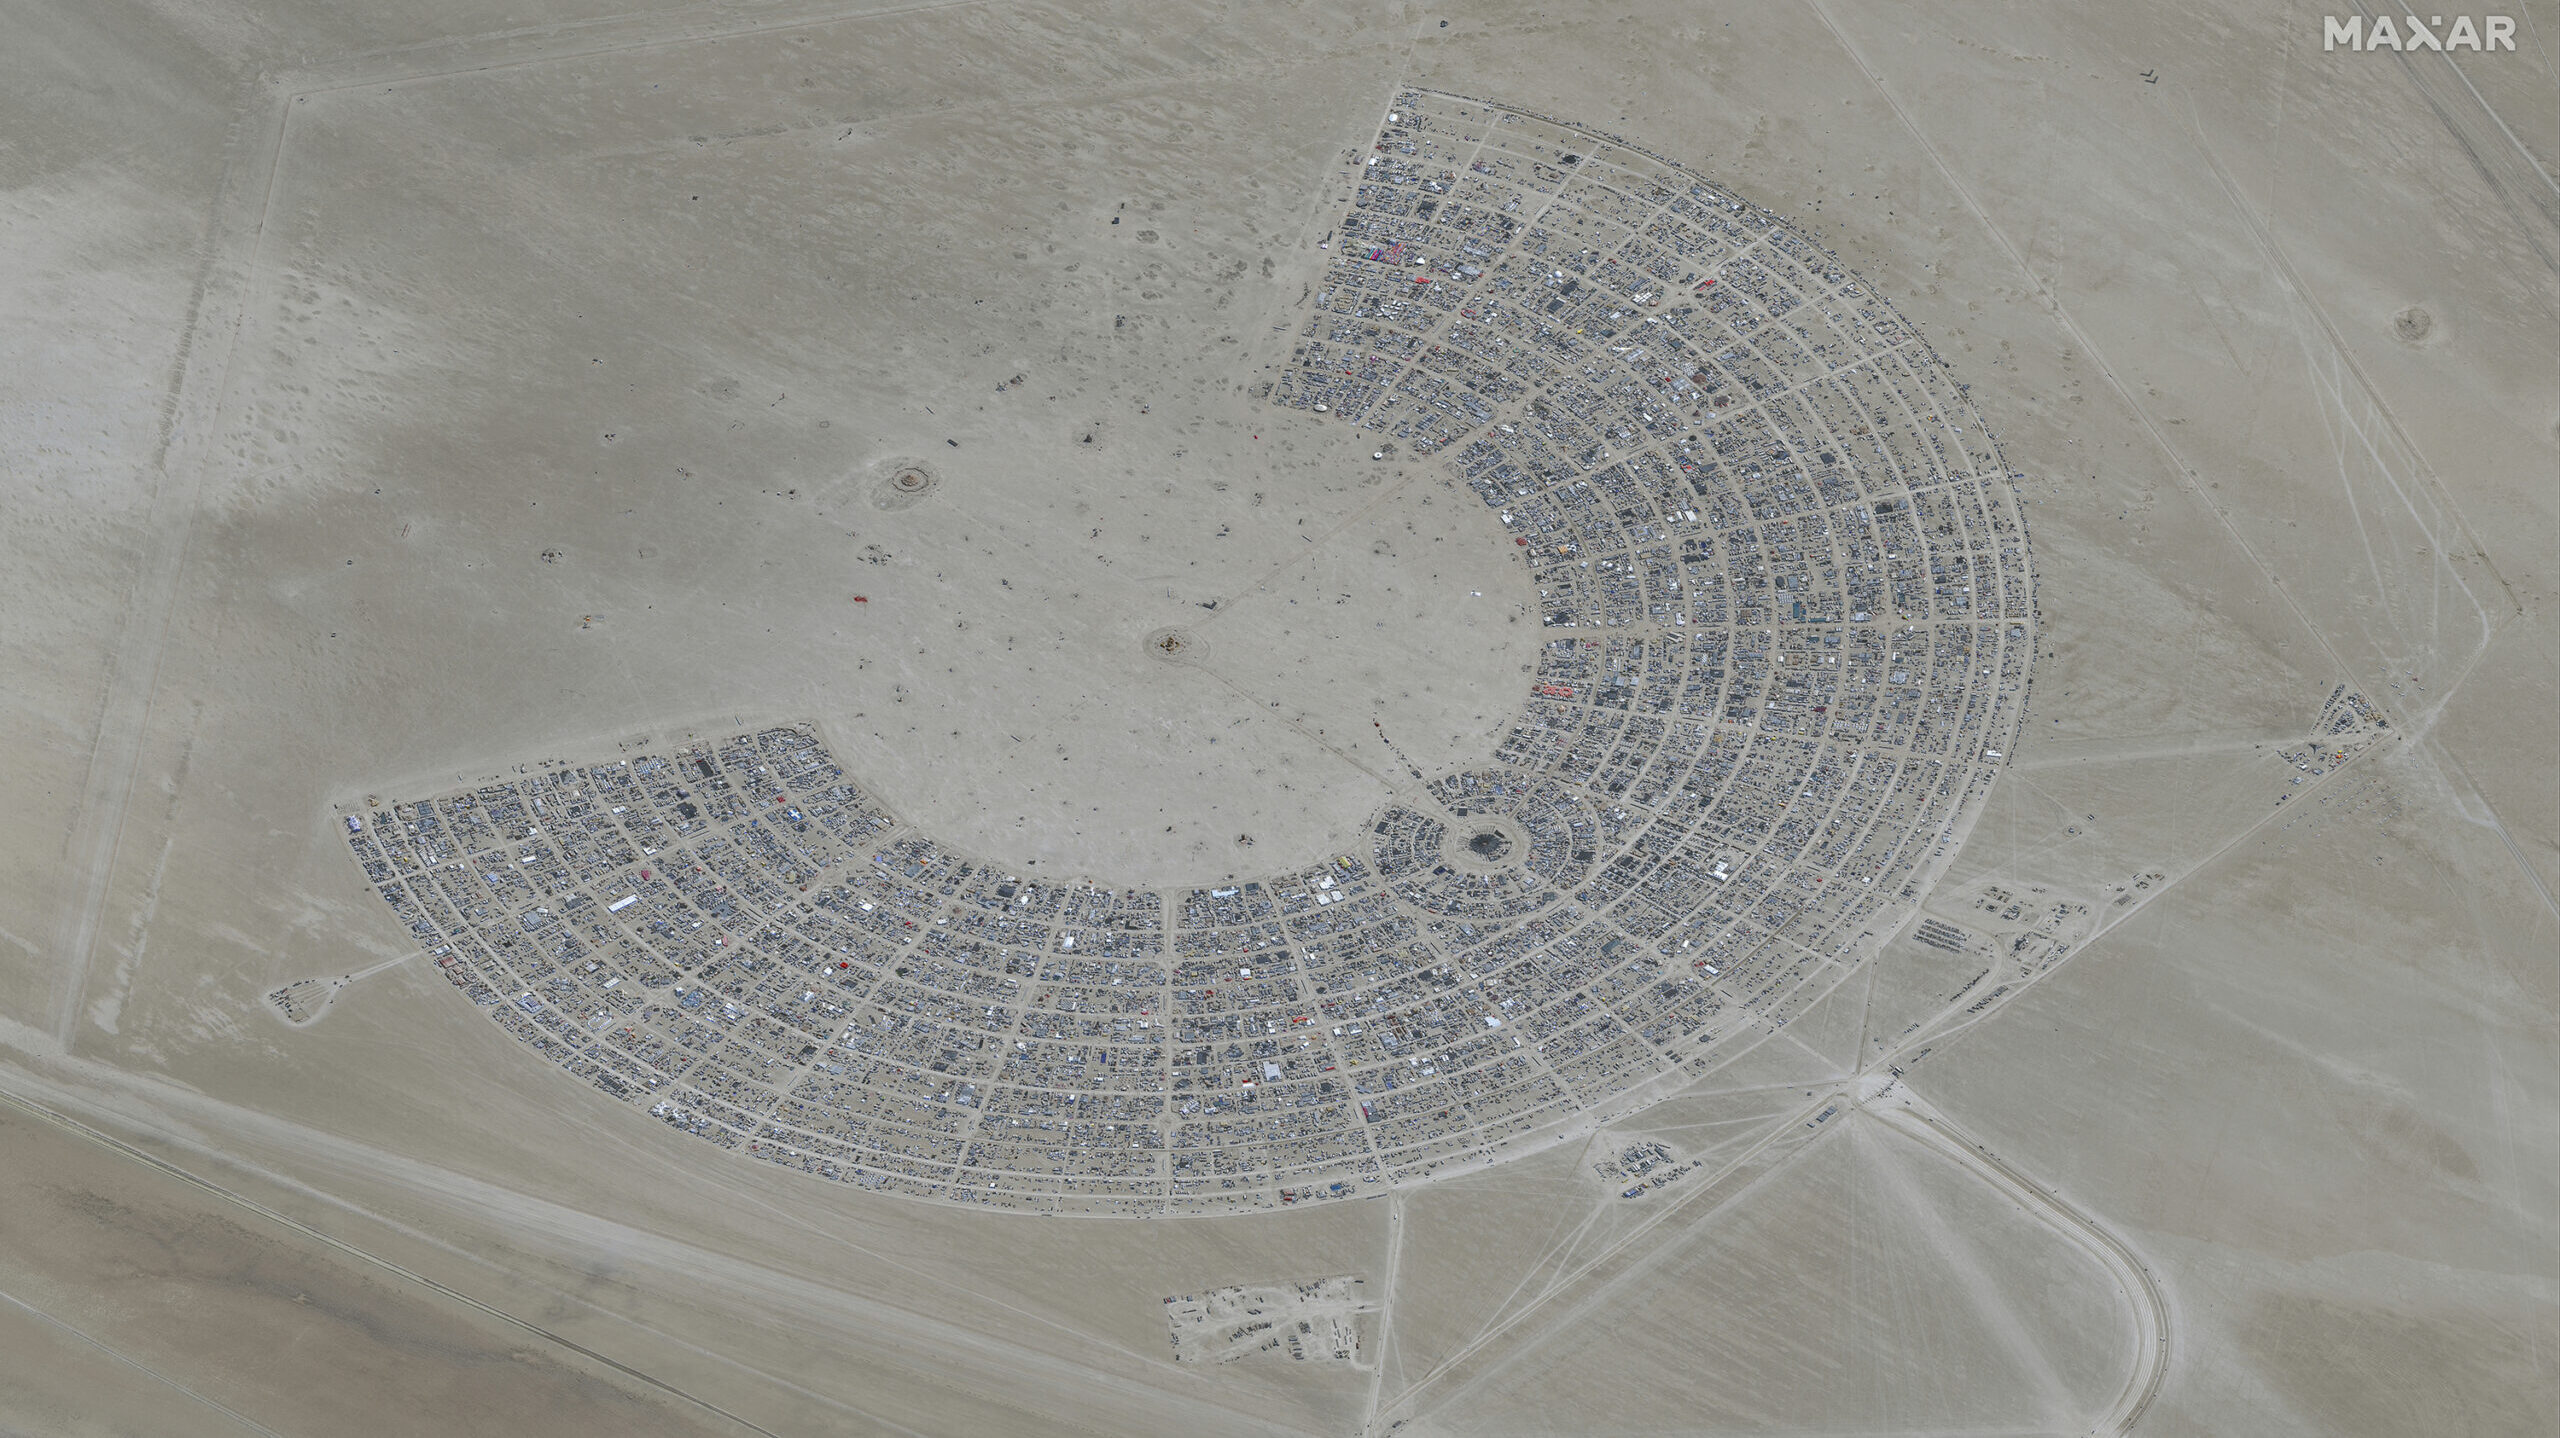 RENO, Nev. (AP) — Authorities in Nevada were investigating a death at the site of the Burning Man...